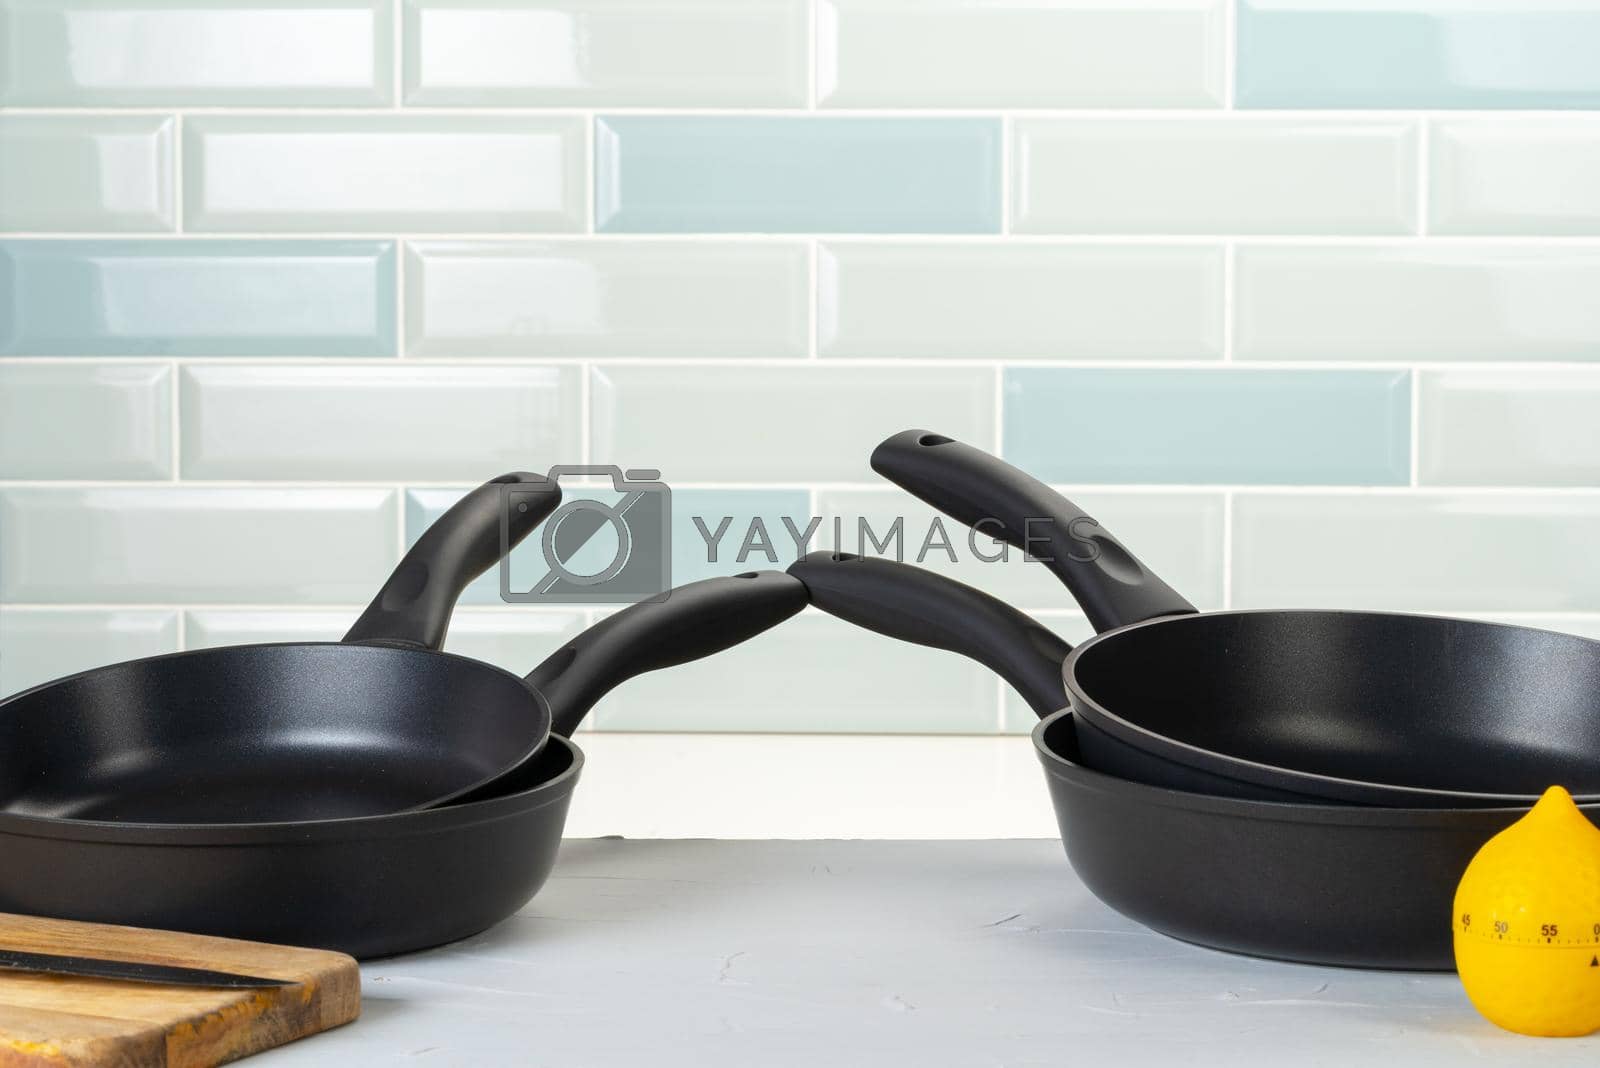 Royalty free image of Clean and dry cooking pans on a kitchen counter by Fabrikasimf